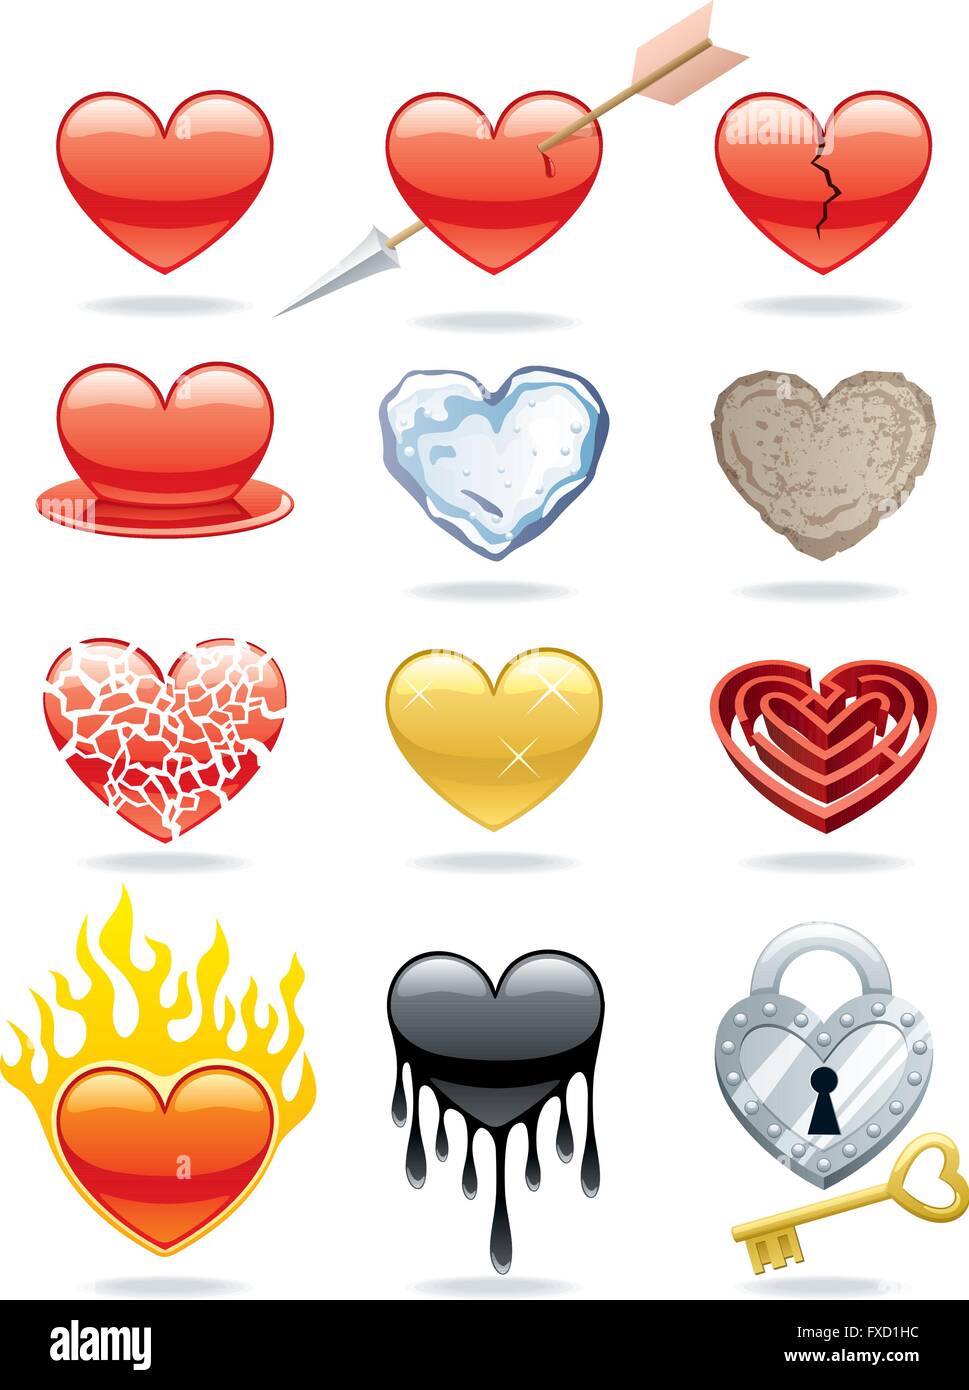 Set of 12 heart icons. Stock Vector